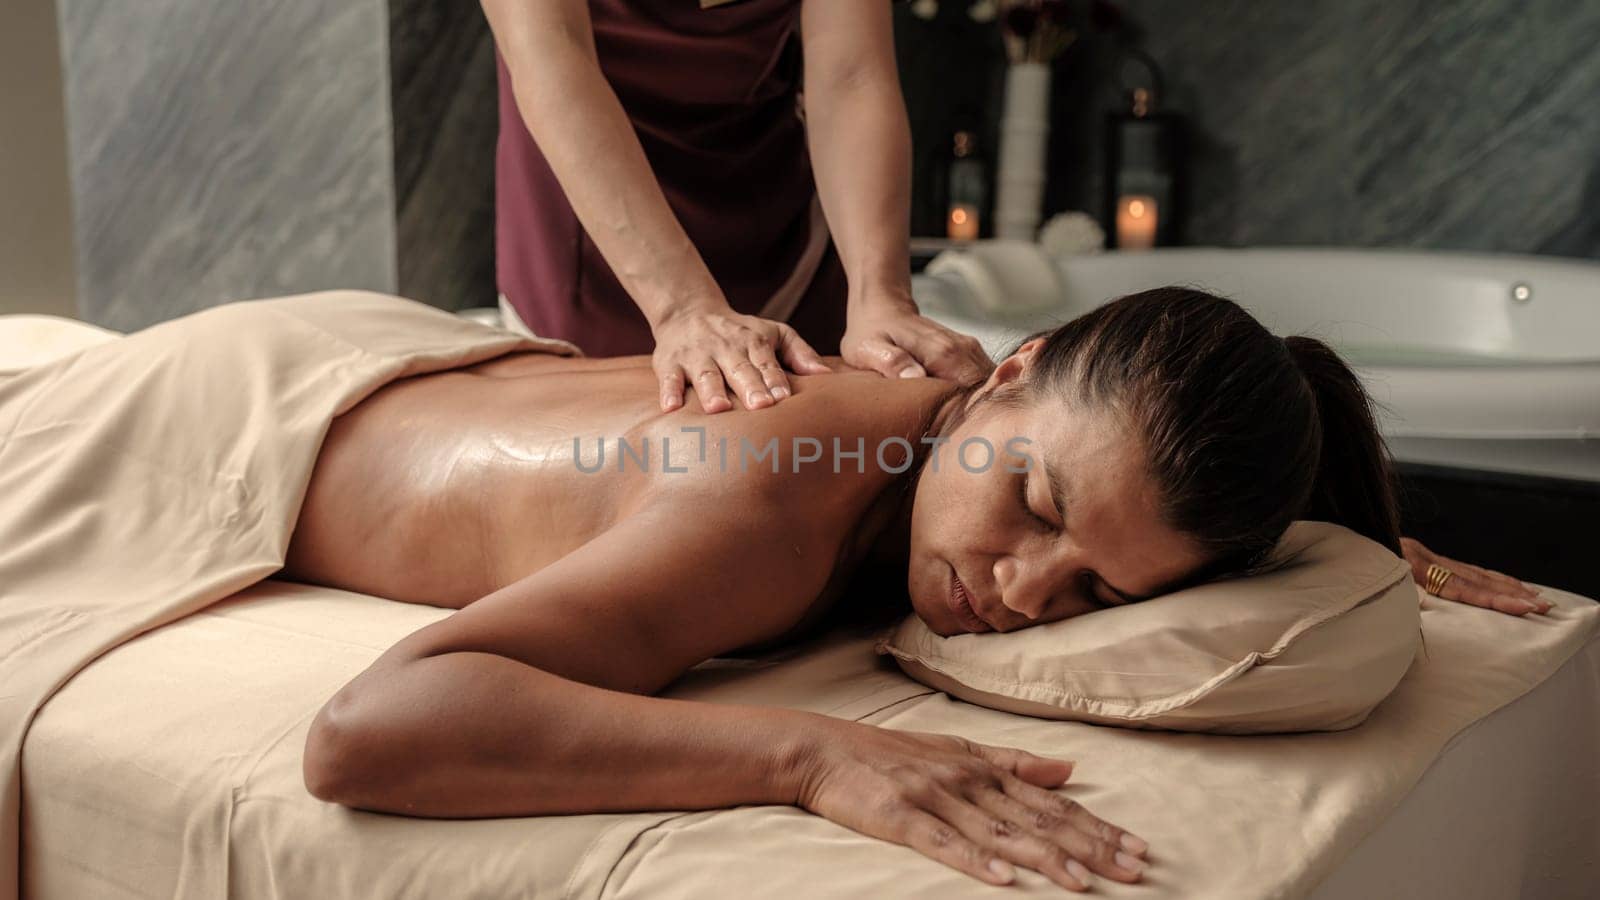 Asian woman getting a Thai massage in a Massage room in Thailand at a luxury hotel by fokkebok